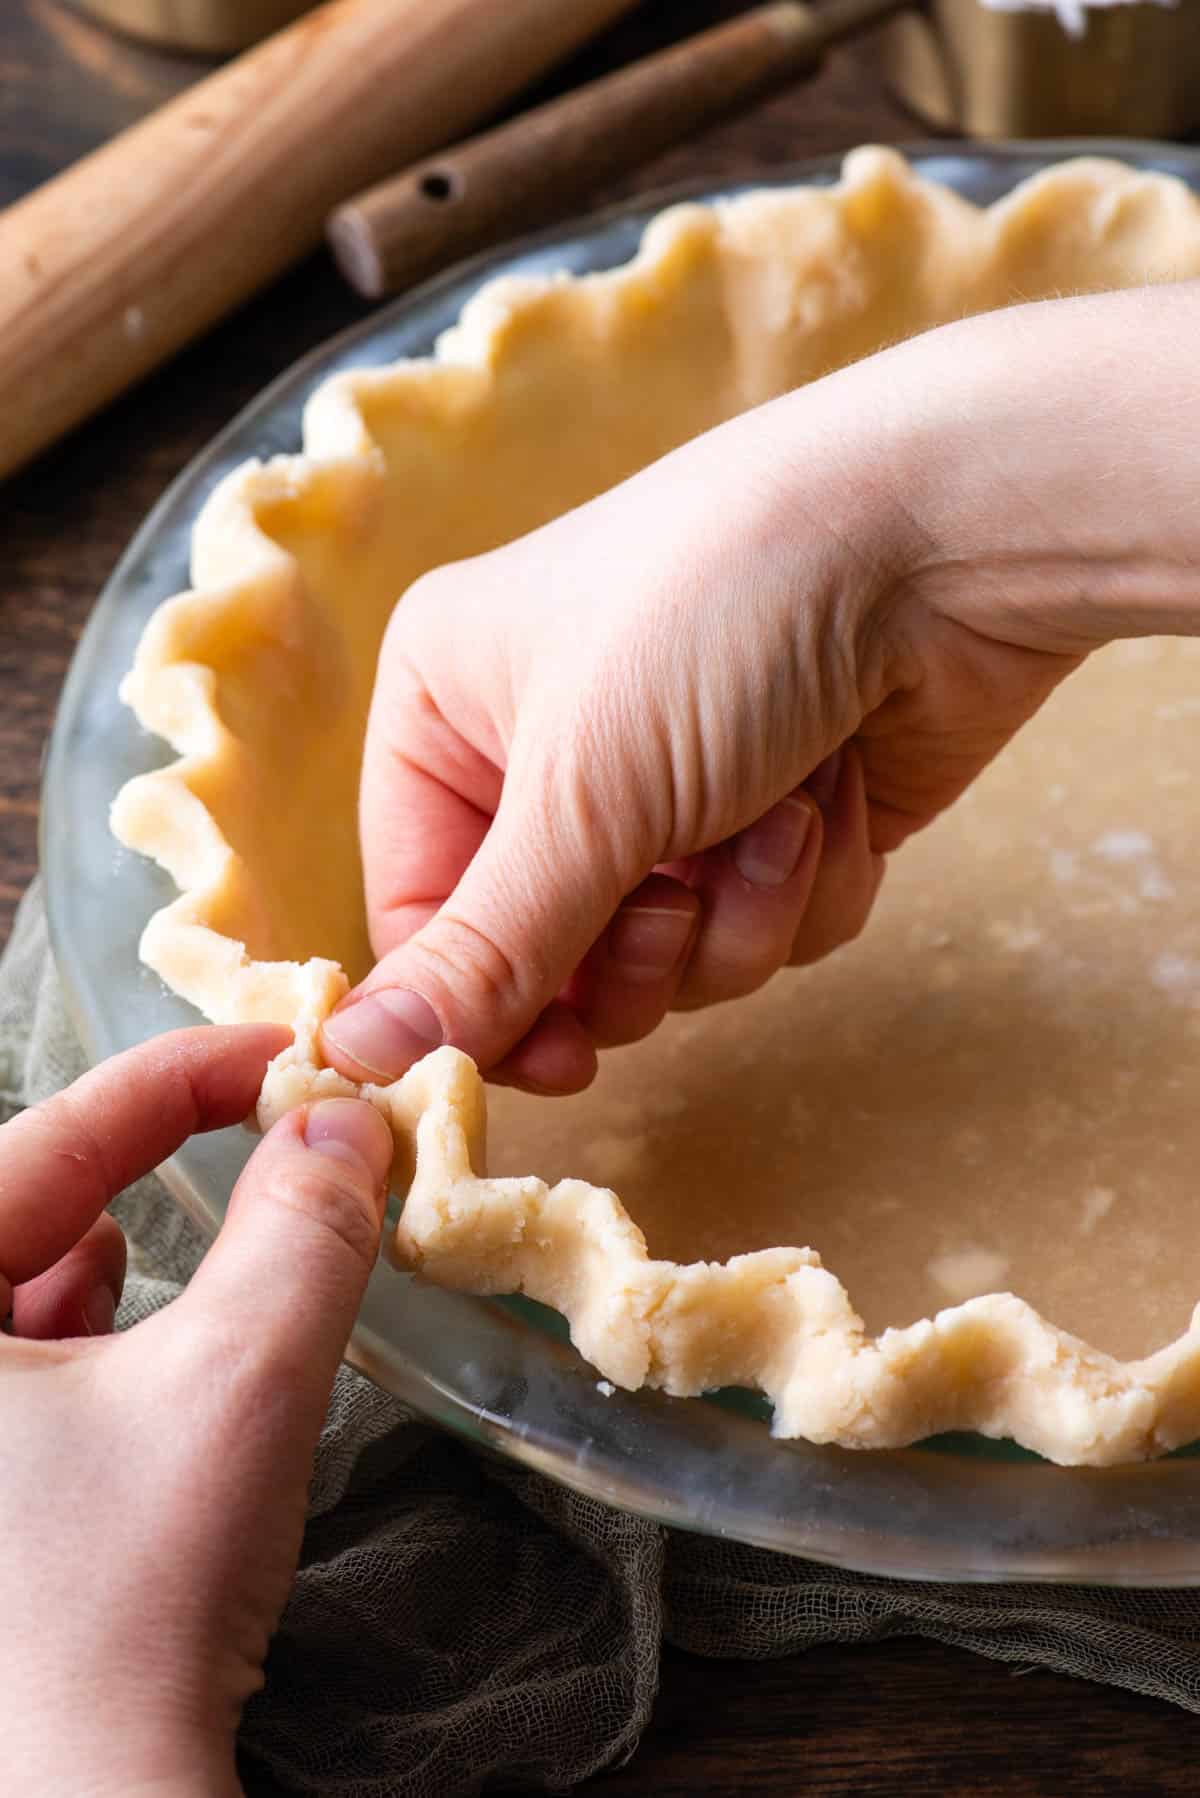 two hands crimping the edge of a pie crust in a clear glass pie pan